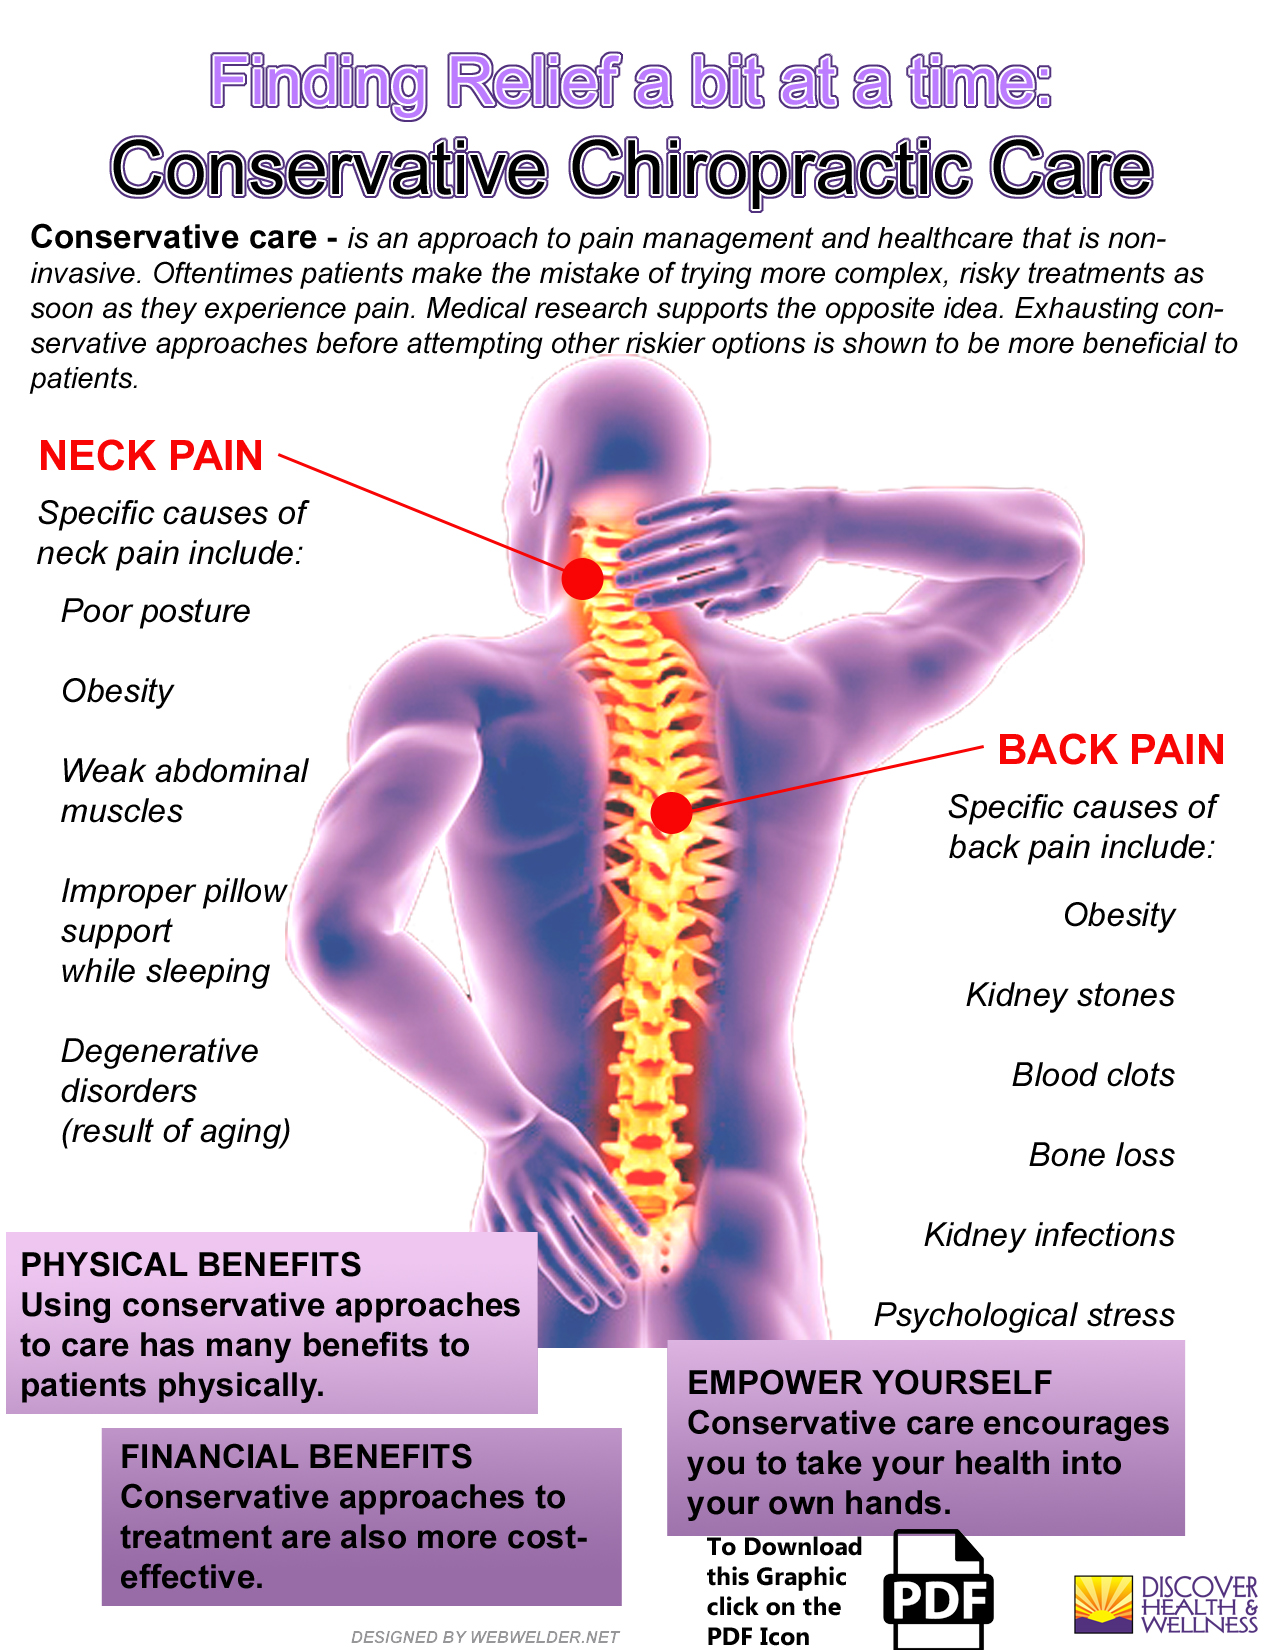 ken caryl-colorado-chiropractic-conservative chiropractic care-infographic